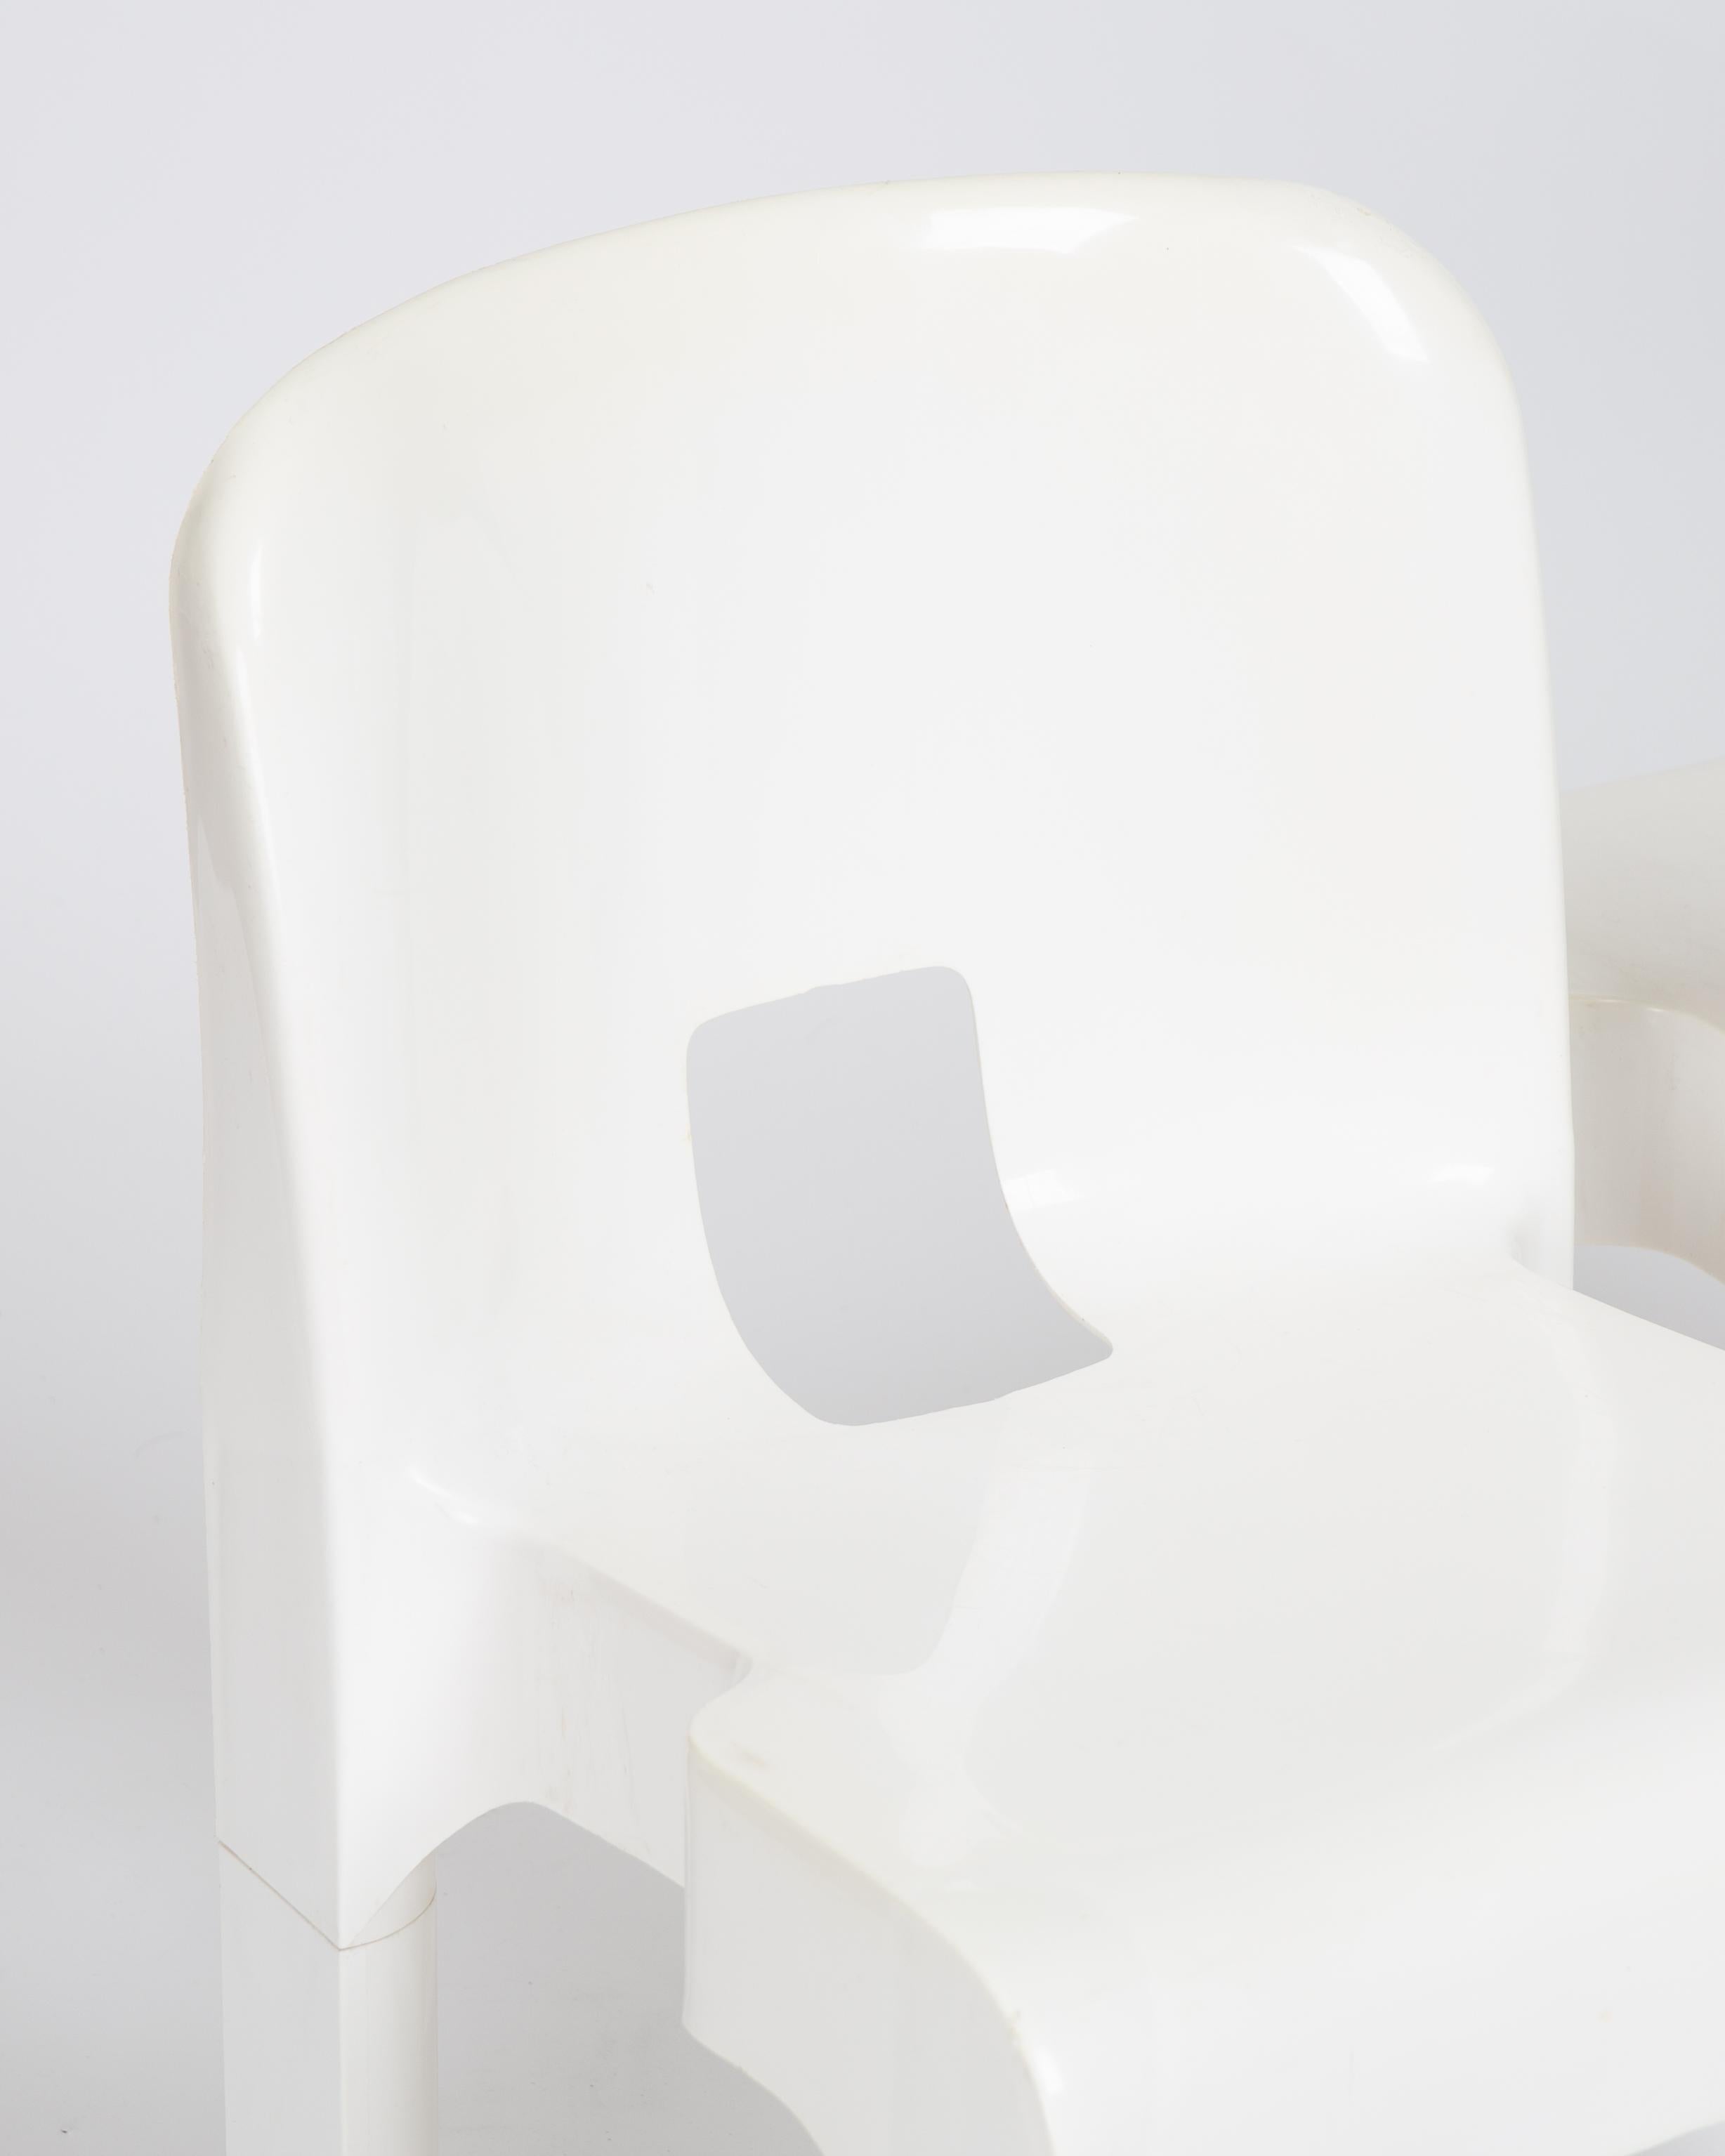 Space Age Joe Colombo Chairs Sedia Universale 4867 by Kartell Vintage Made in Italy For Sale